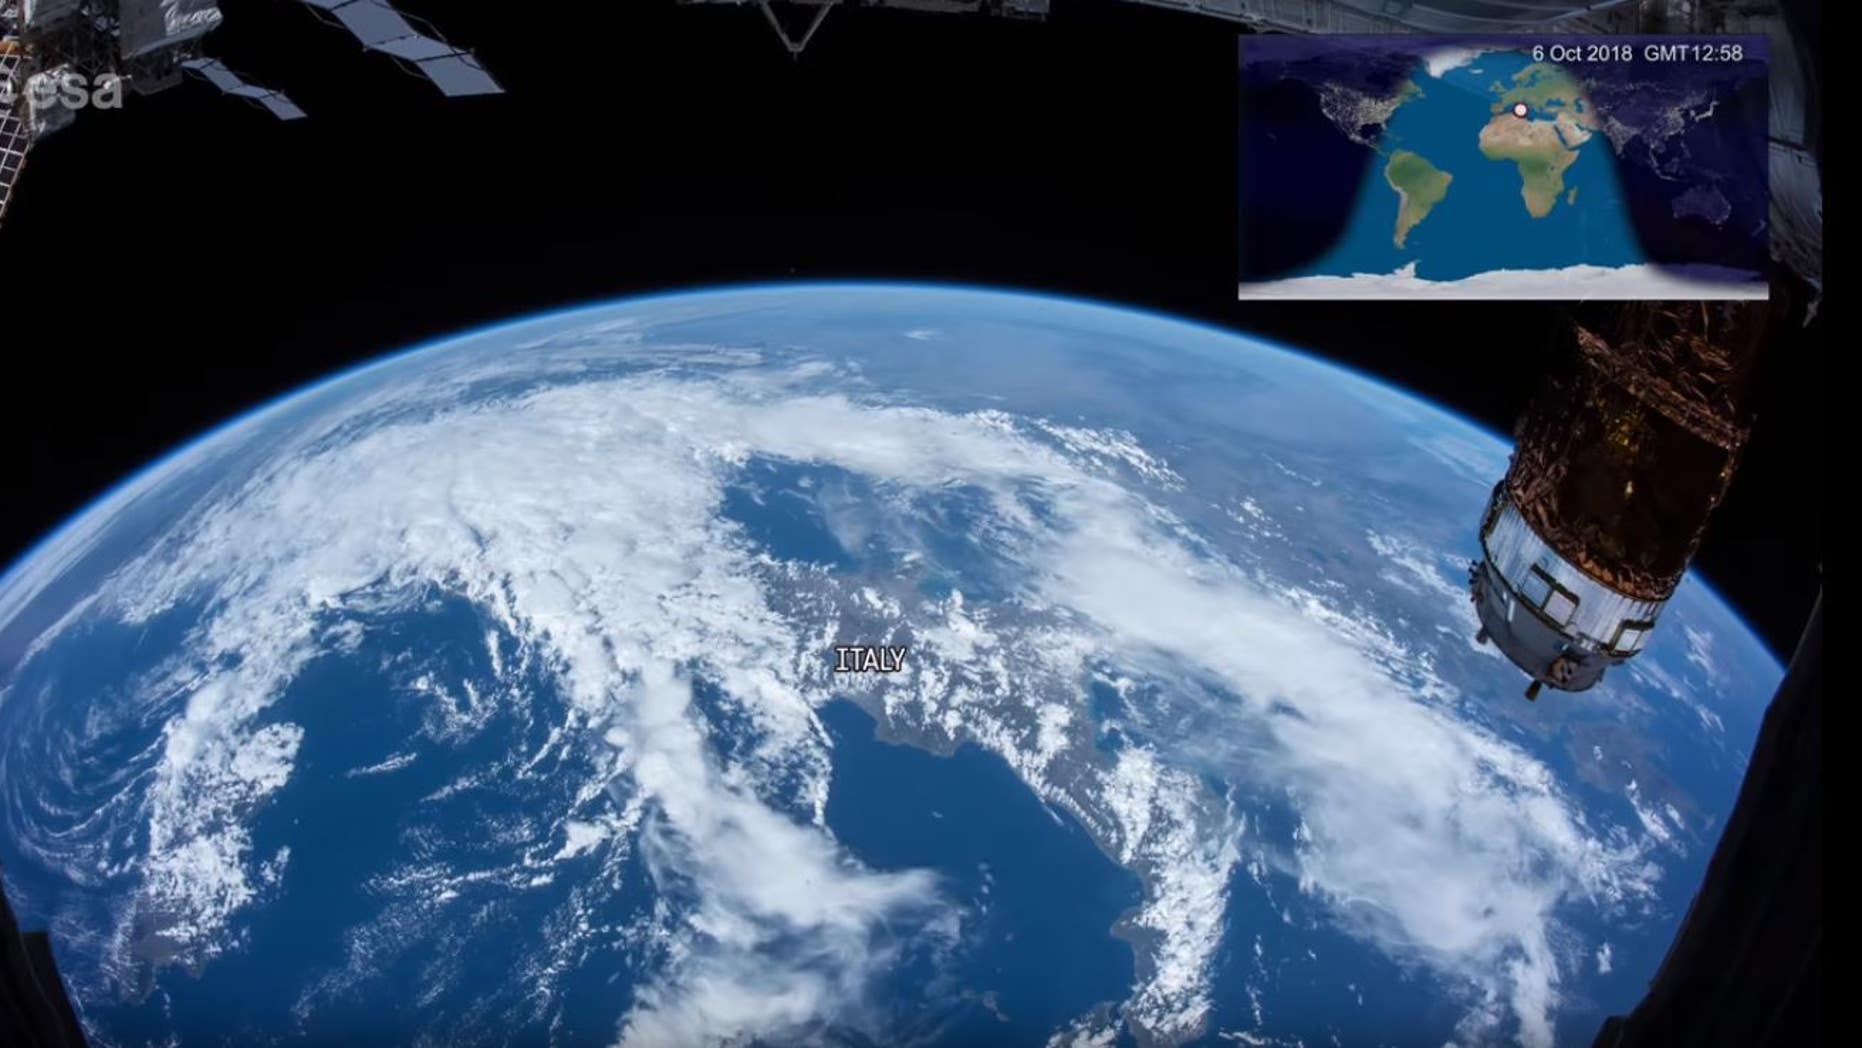 This screenshot of YouTube shows Earth seen from the International Space Station.